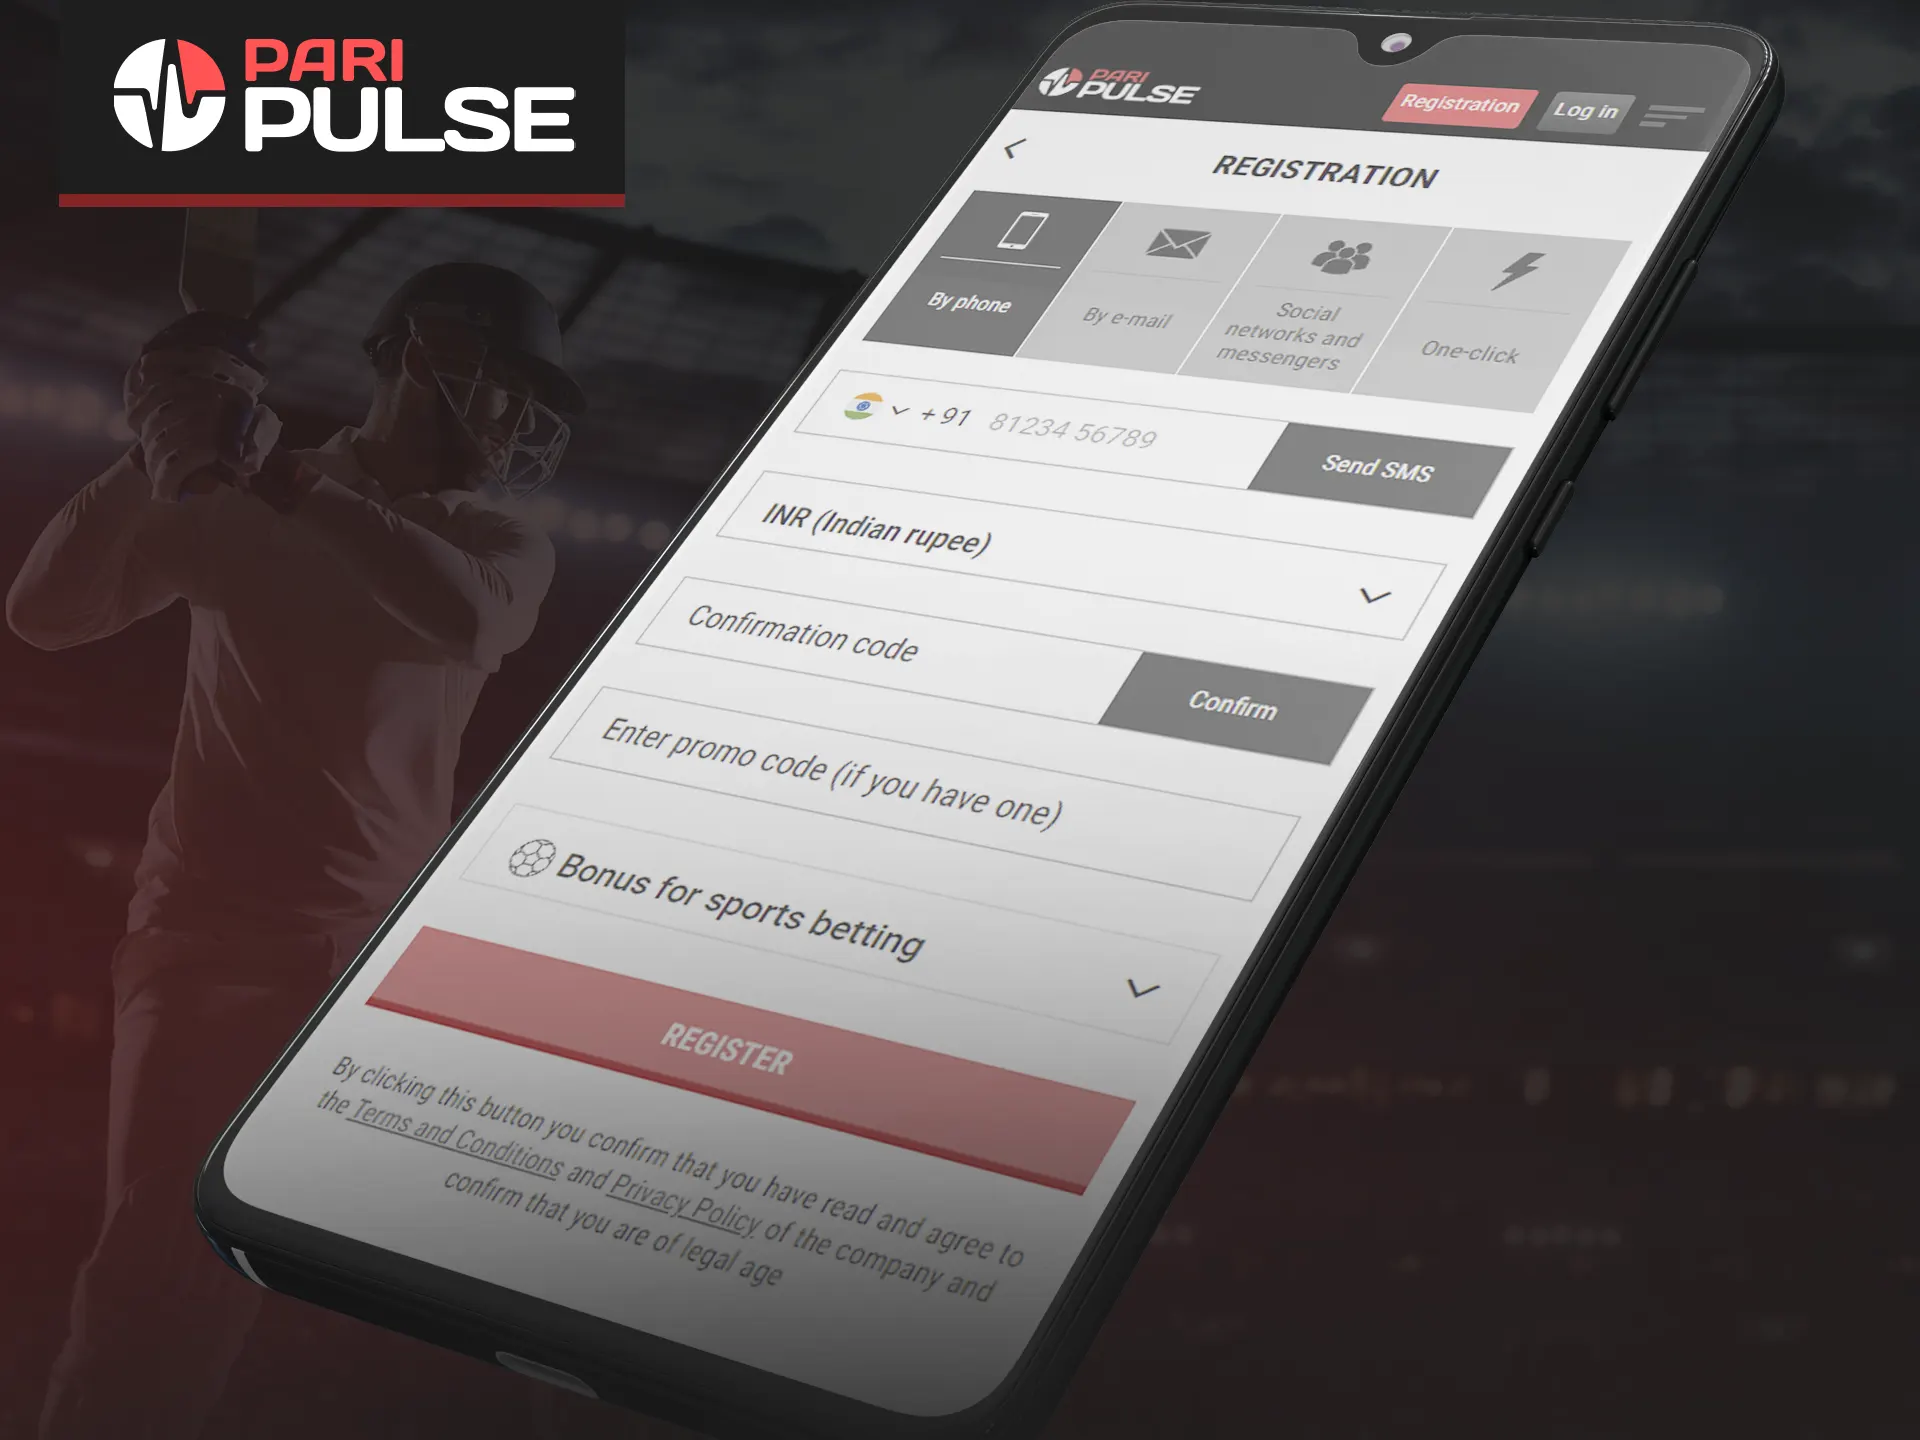 Register an account on the PariPulse mobile app.